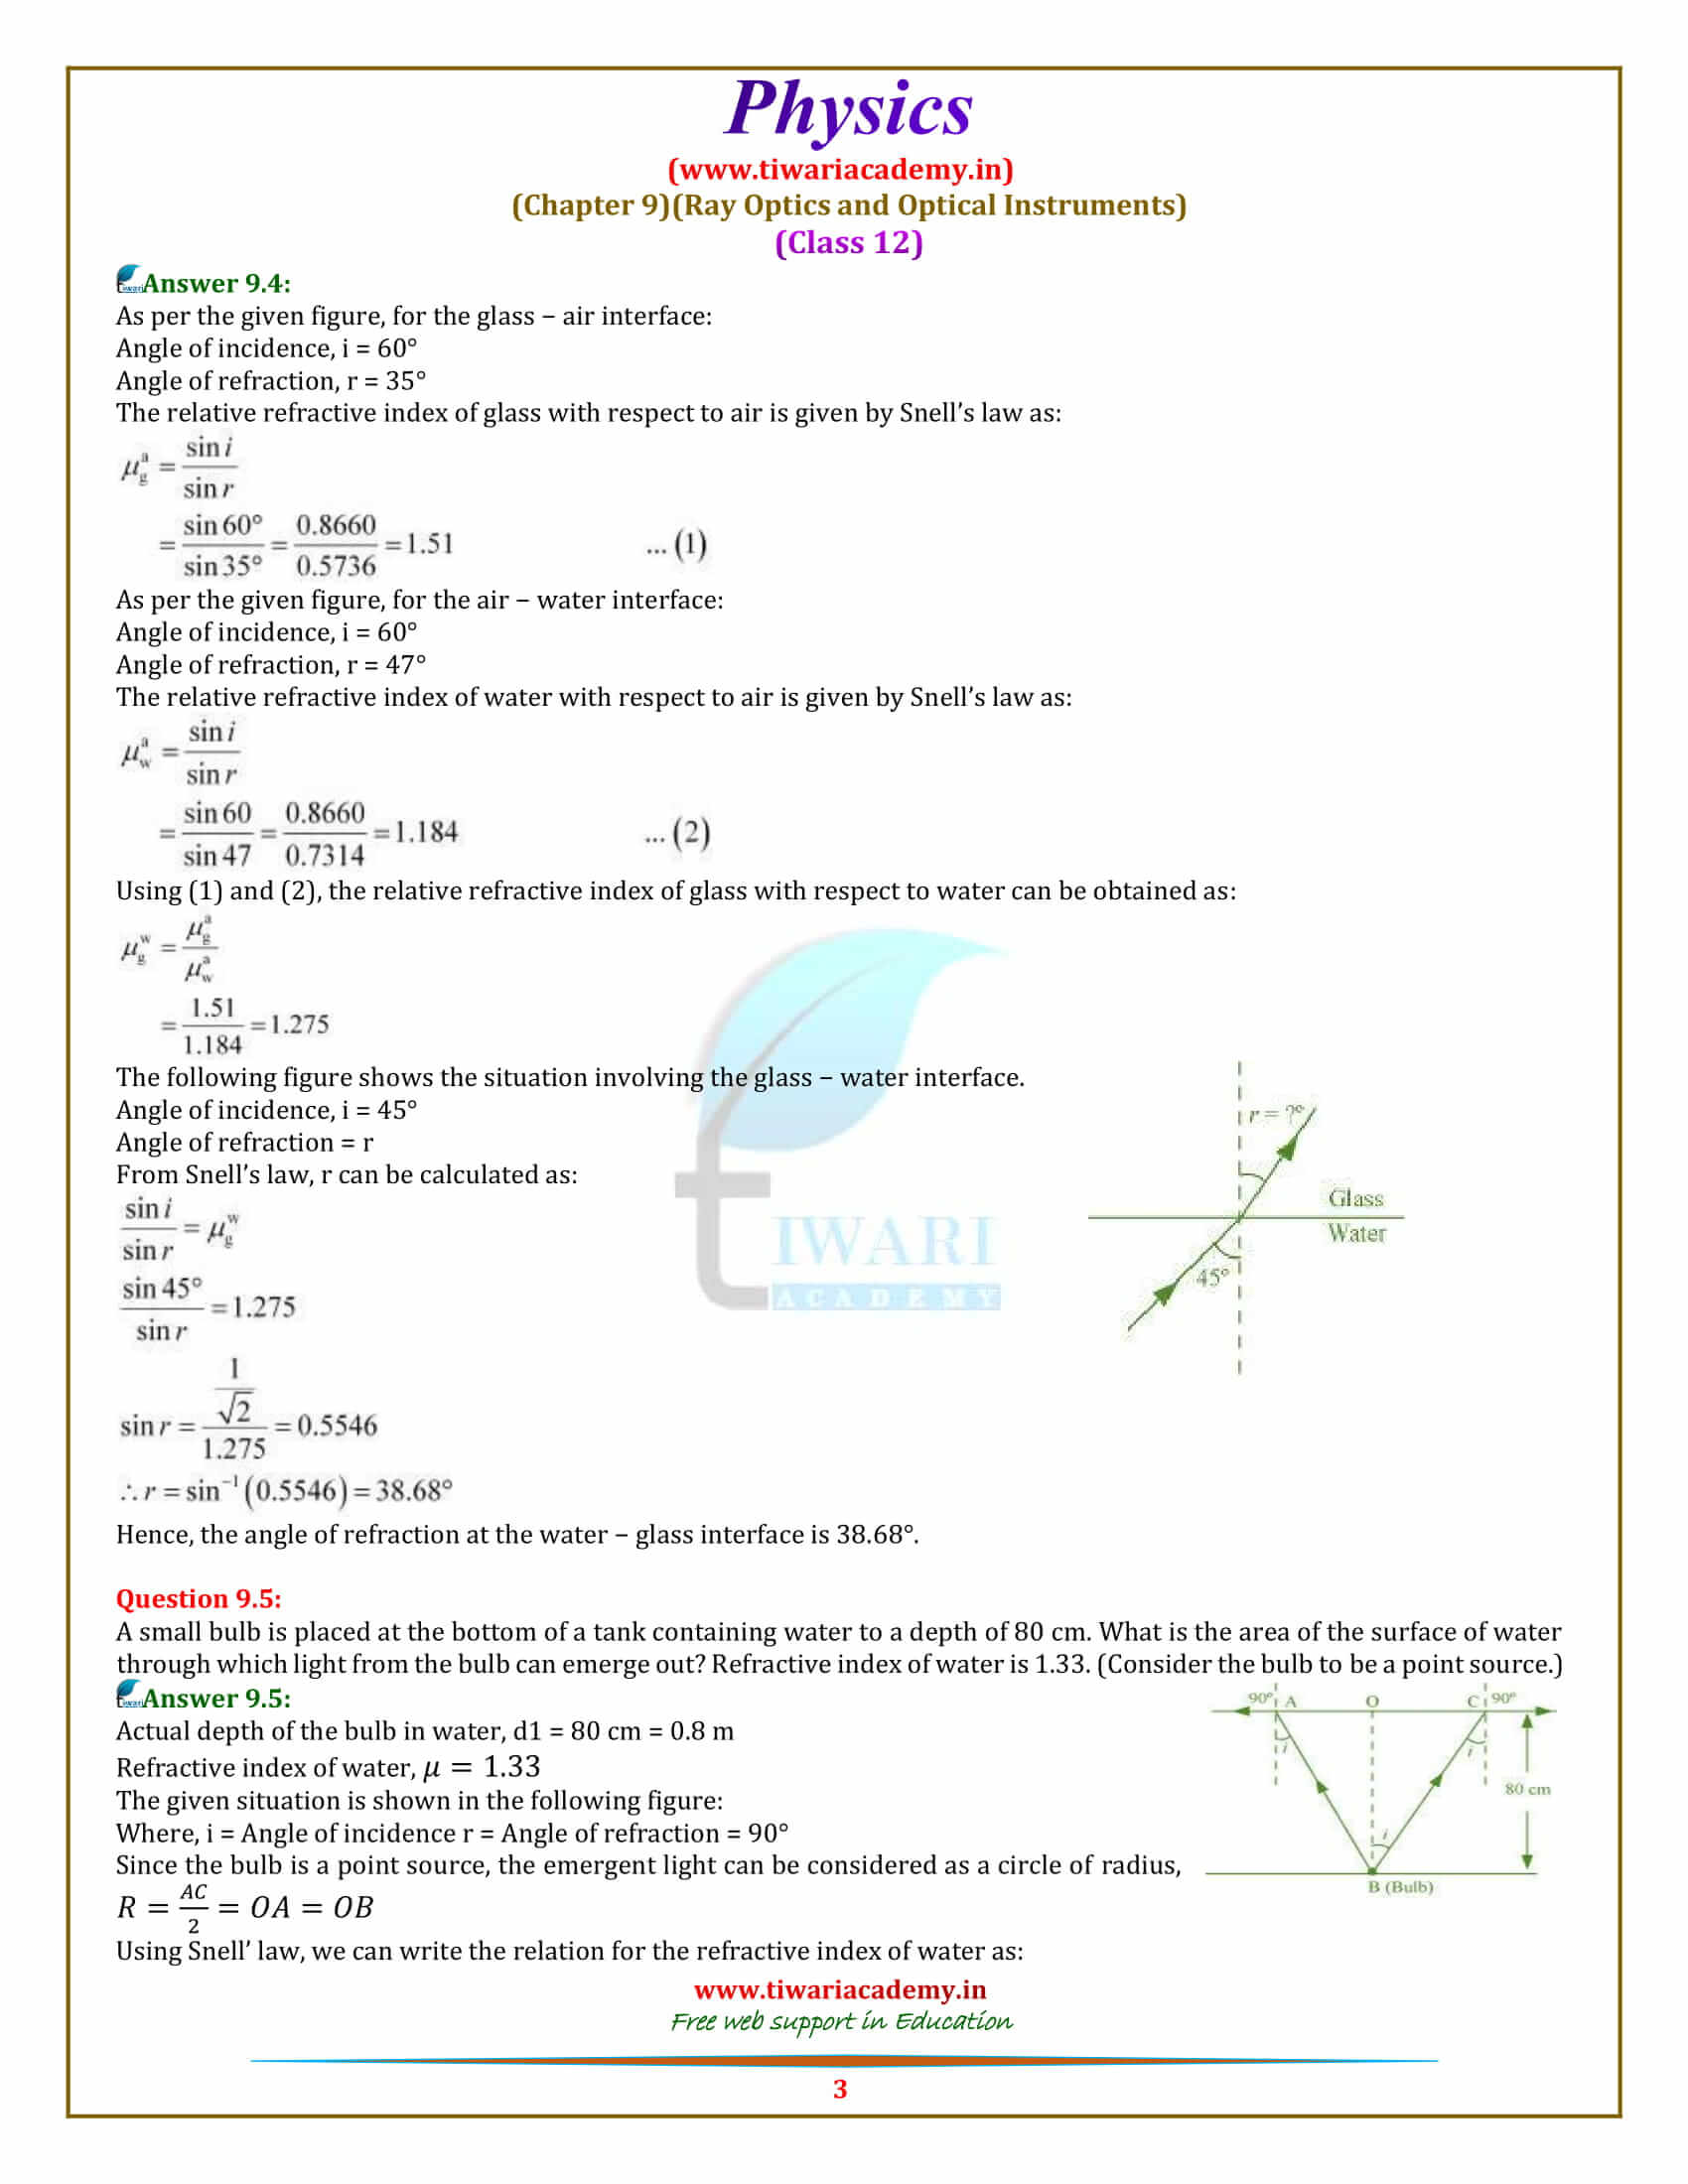 NCERT Solutions for Class 12 Physics Chapter 9 Ray Optics and Optical Instruments free download